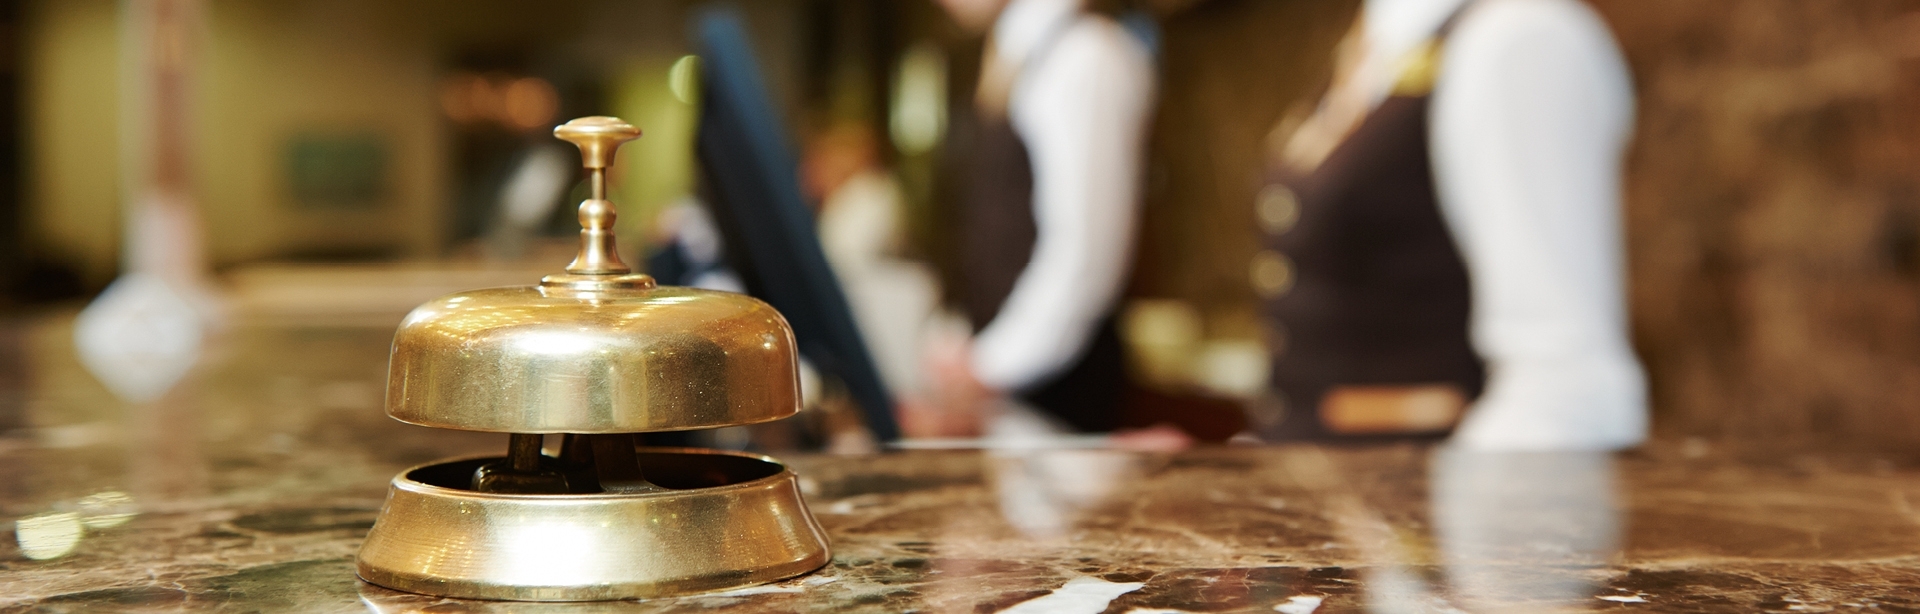 Hospitality Security Blog Series – Part 2